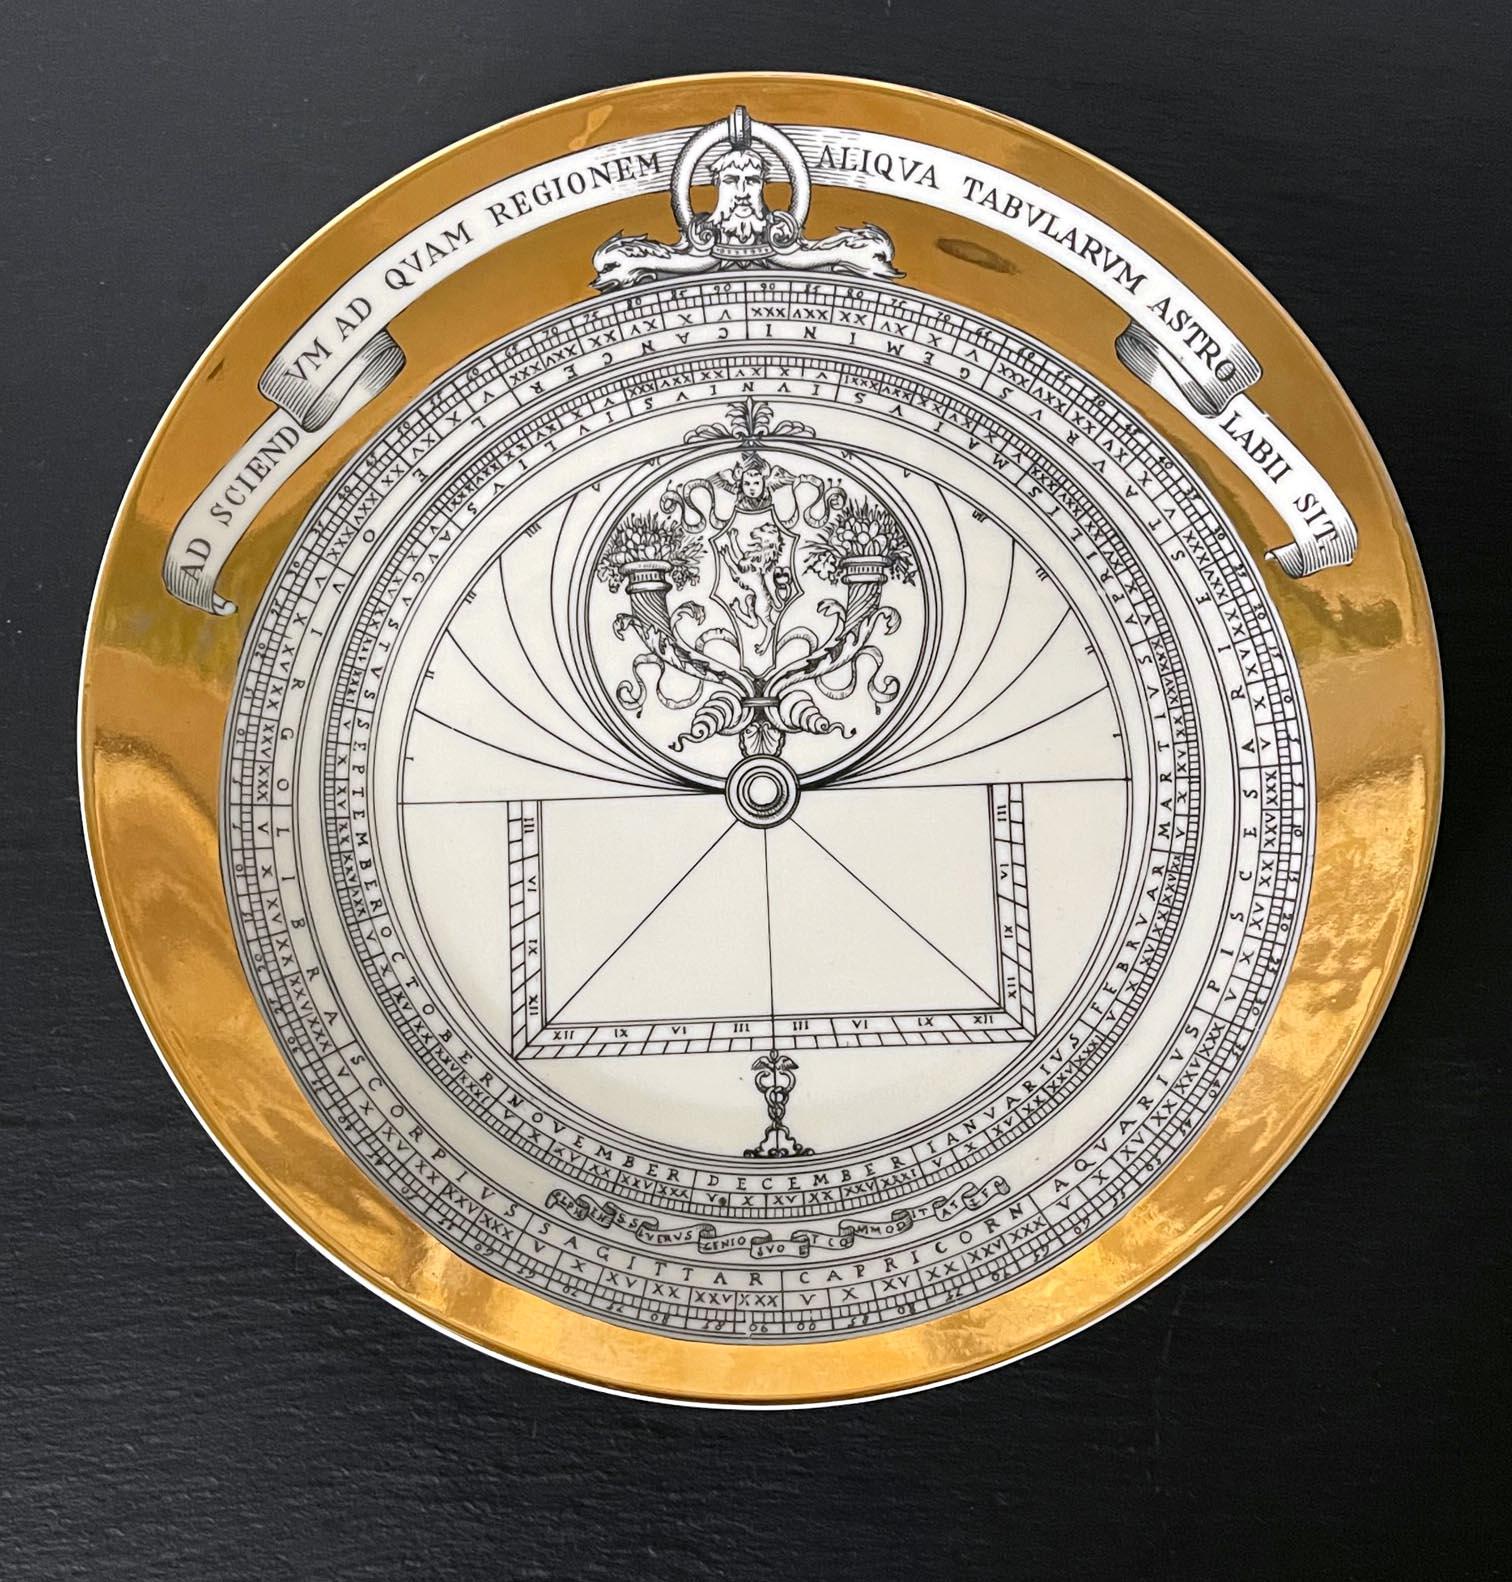 A porcelain plate designed by Piero Fornasetti as no,3 of the twelves-piece set of the Astrolabe series between 1965-1976. The series each depicts an Astrolabio, an elaborate inclinometer of classical antiquity time used by astronomers, navigators,